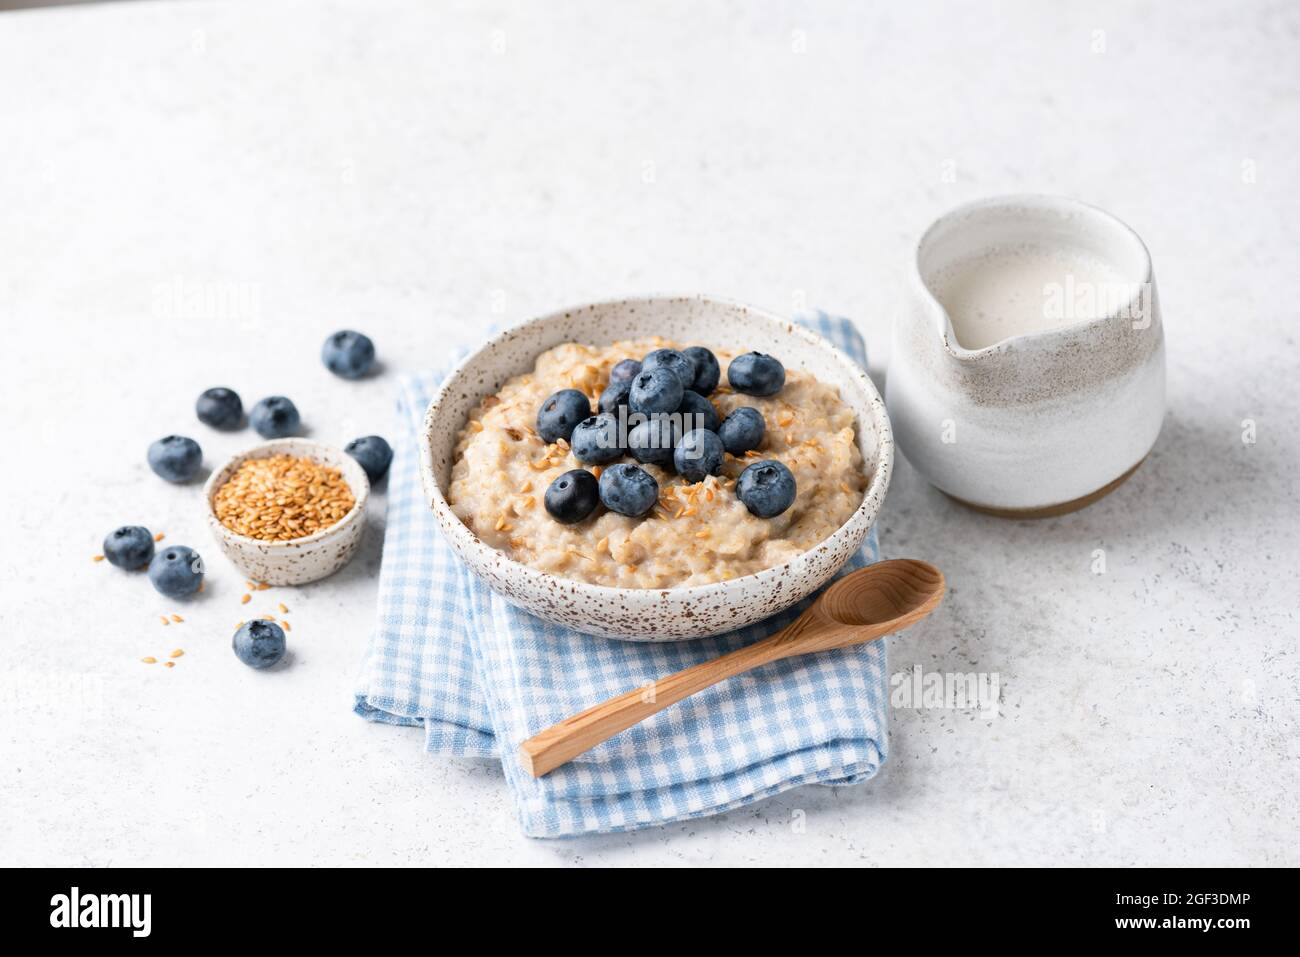 Vegan oatmeal porridge with blueberries and flax seeds on natural grey background. Healthy eating, dieting, fitness food lifestyle concept Stock Photo